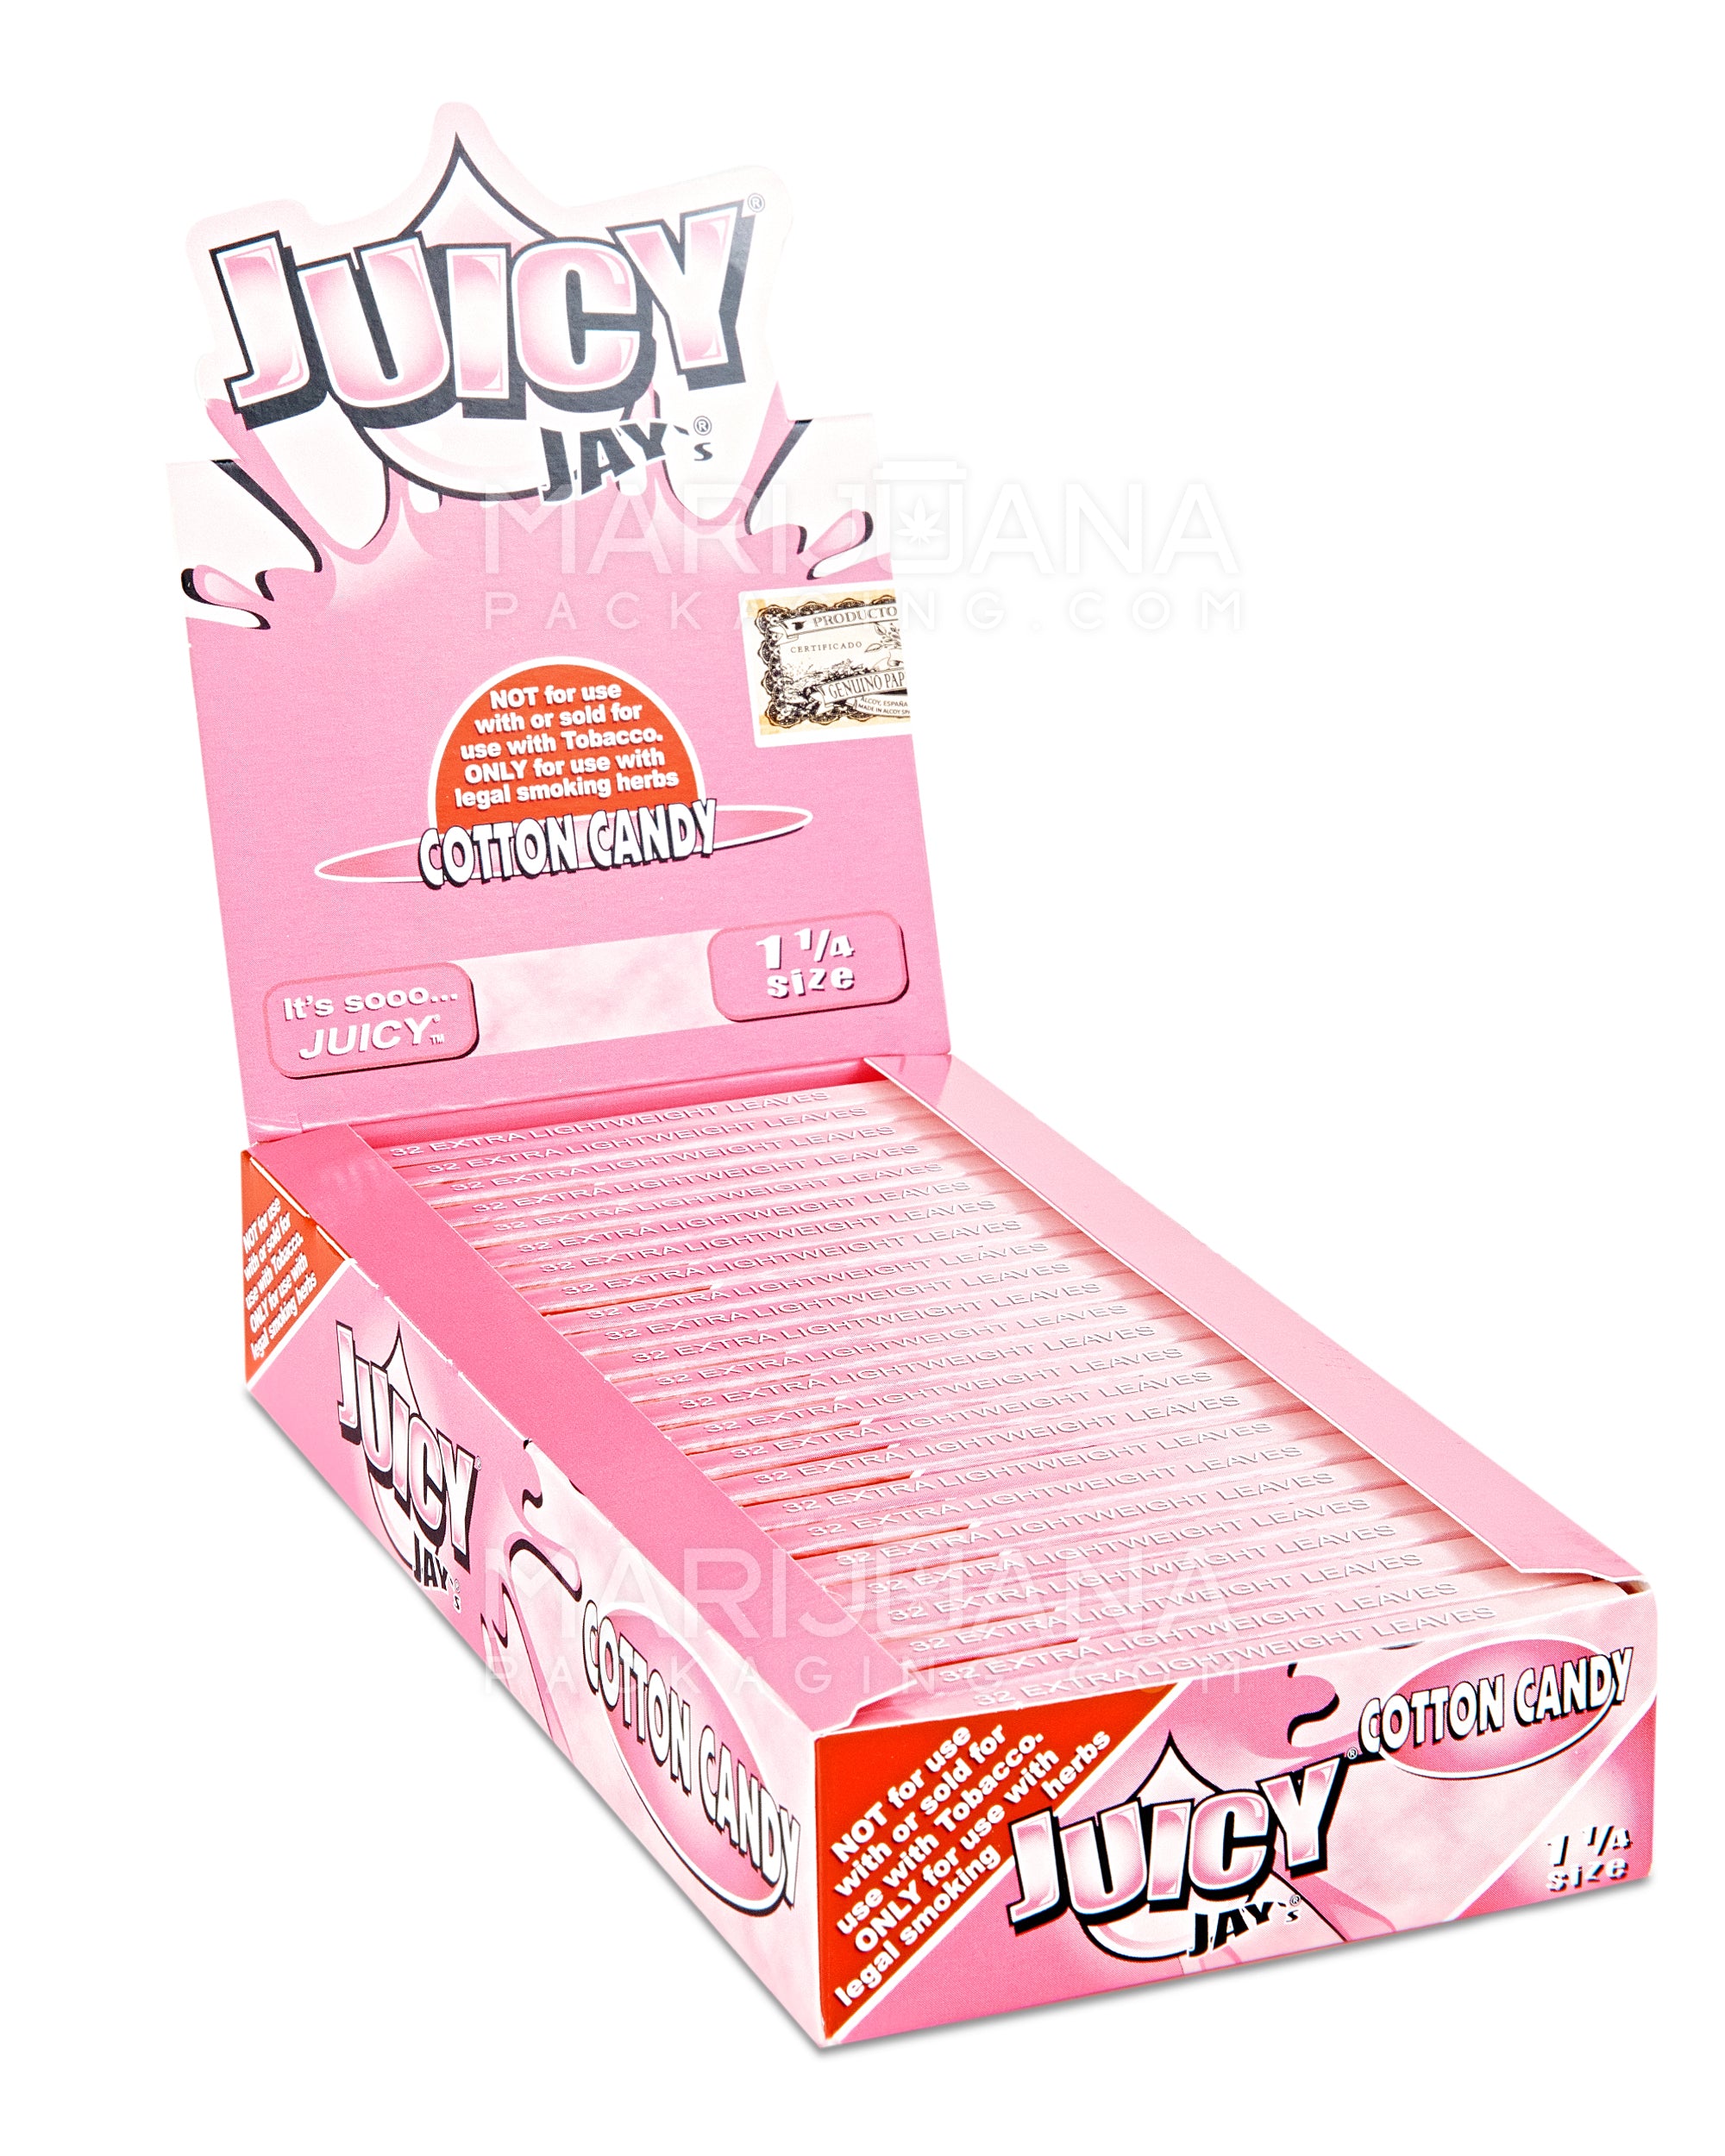 JUICY JAY'S | 'Retail Display' 1 1/4 Size Hemp Rolling Papers | 76mm - Cotton Candy - 24 Count - 1